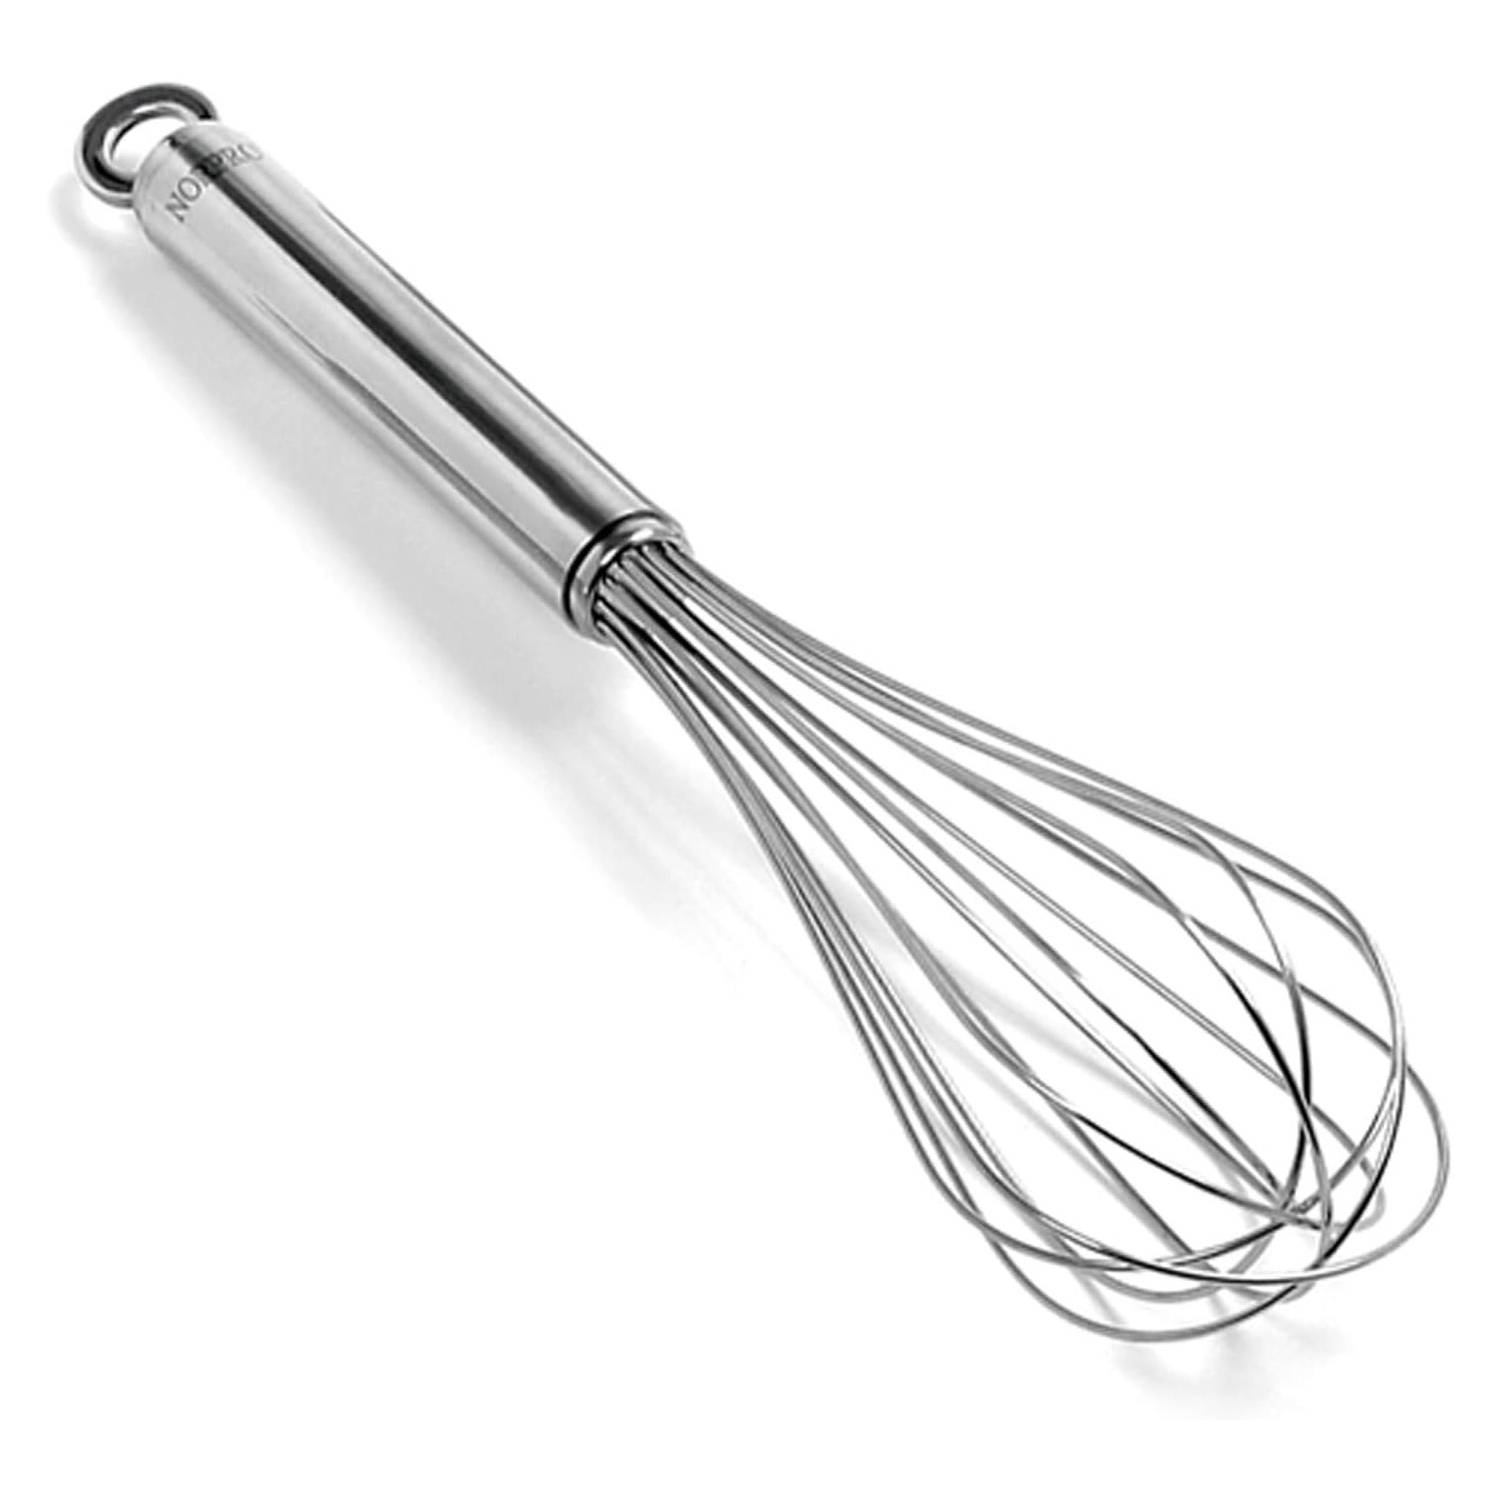 STAINLESS STEEL BALLOON WHISK - 11IN - BUY NOW